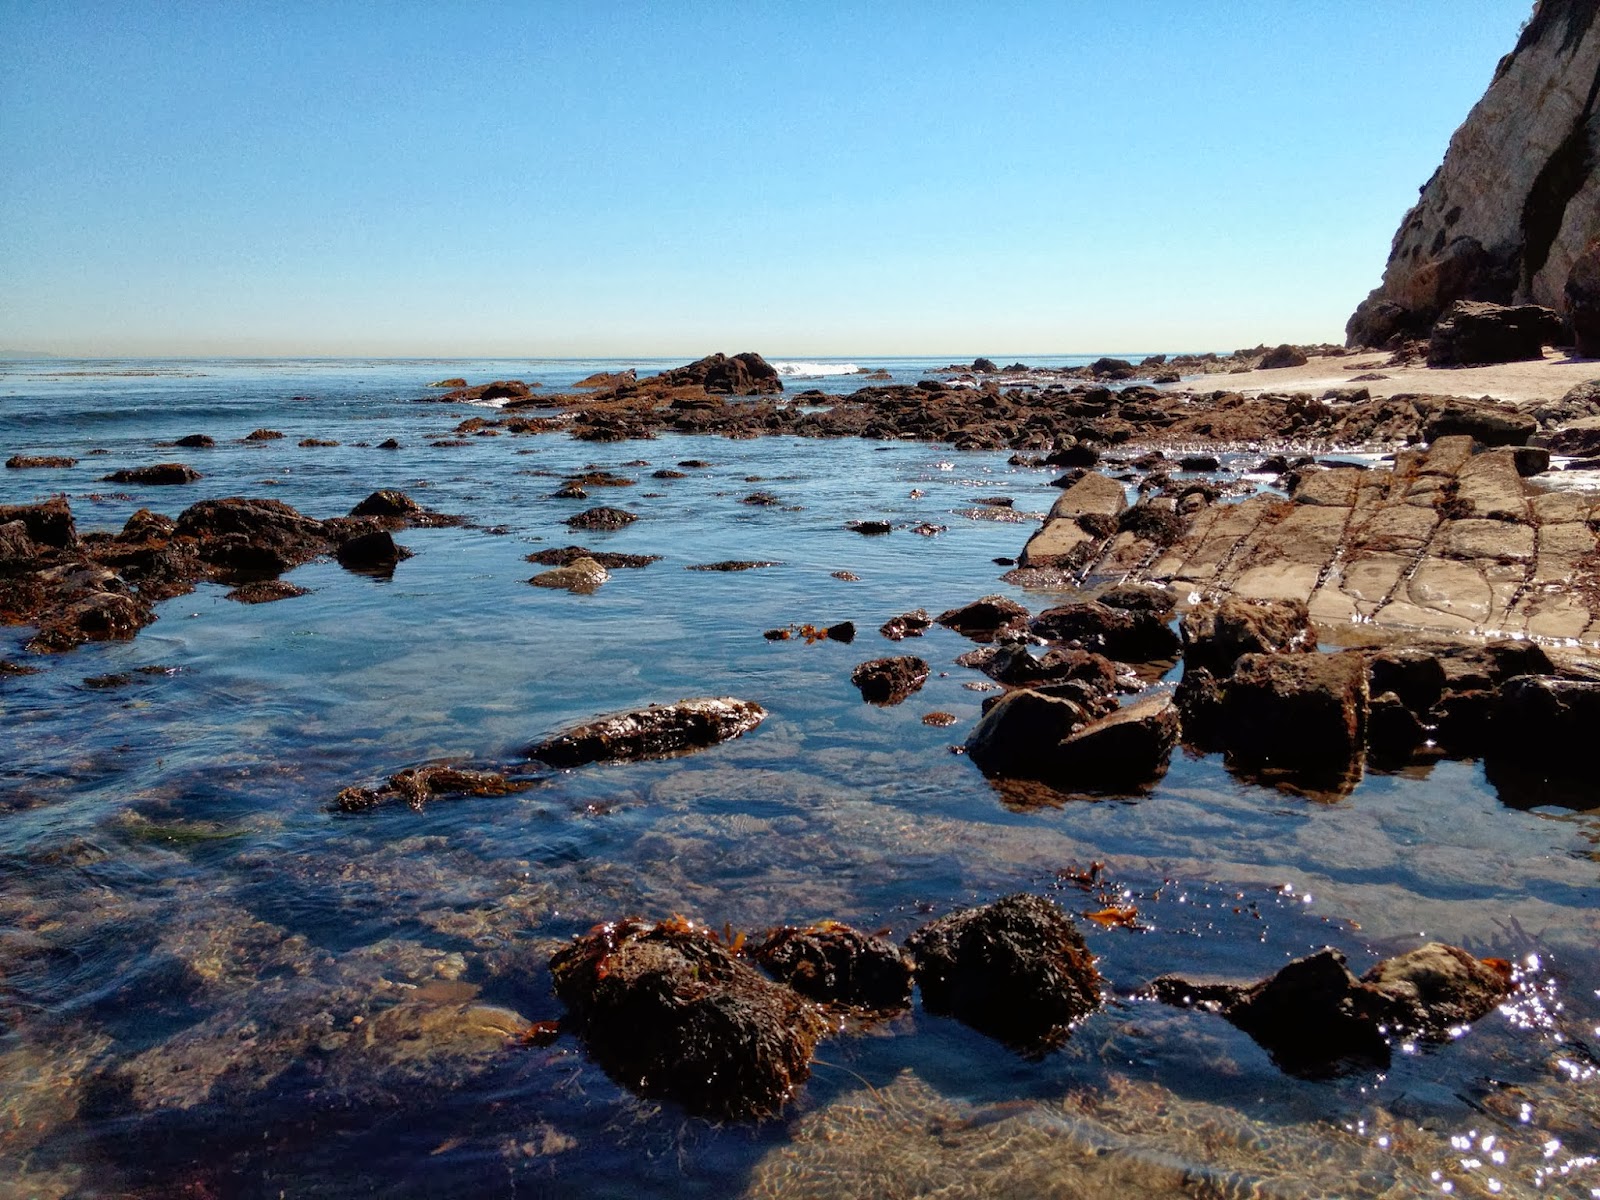 The Malibu Post: Between the Tides